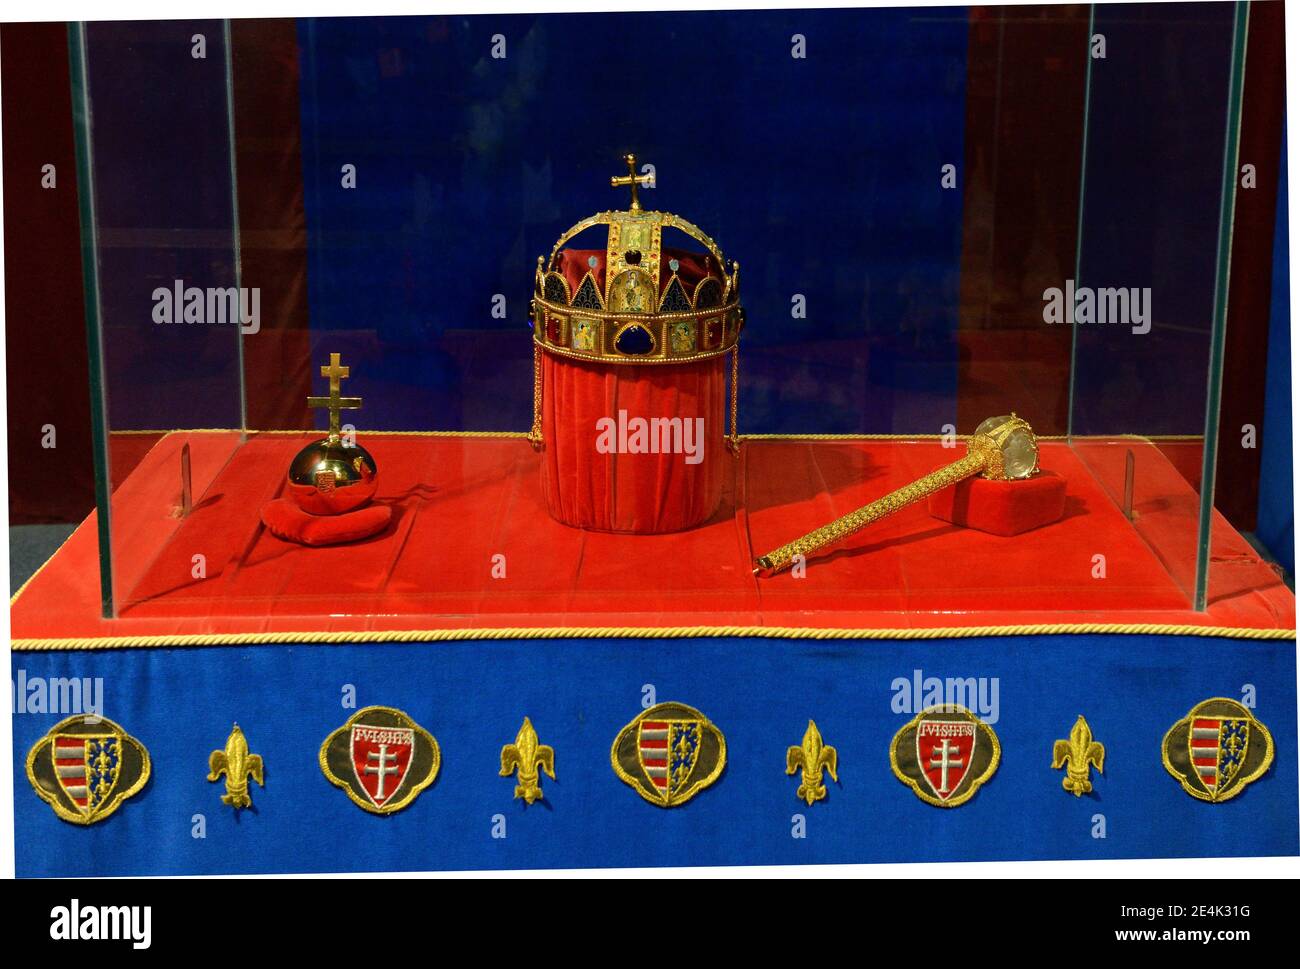 Replica of the Hungarian royal crown, St. Stephen's crown, imperial insignia, castle, Visegrad, Hungary Stock Photo